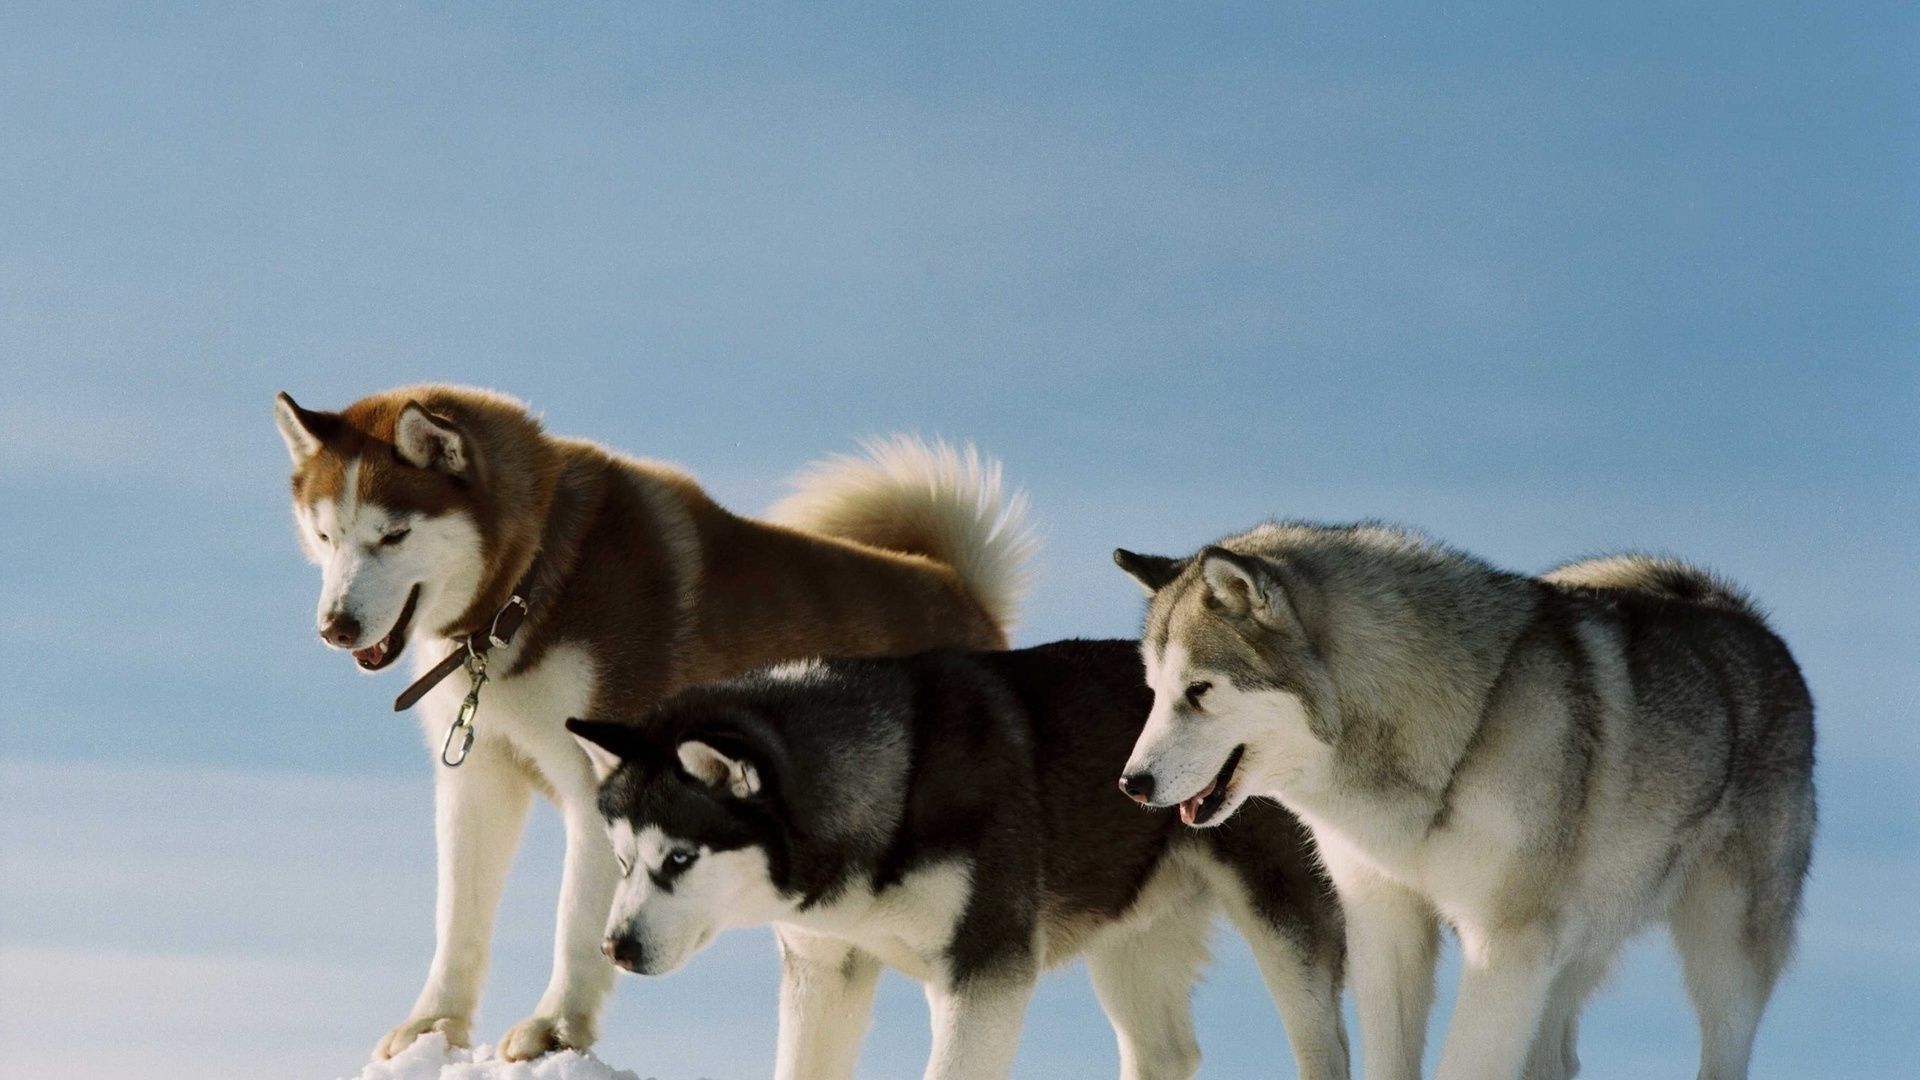 A pack of huskies from the movie eight below